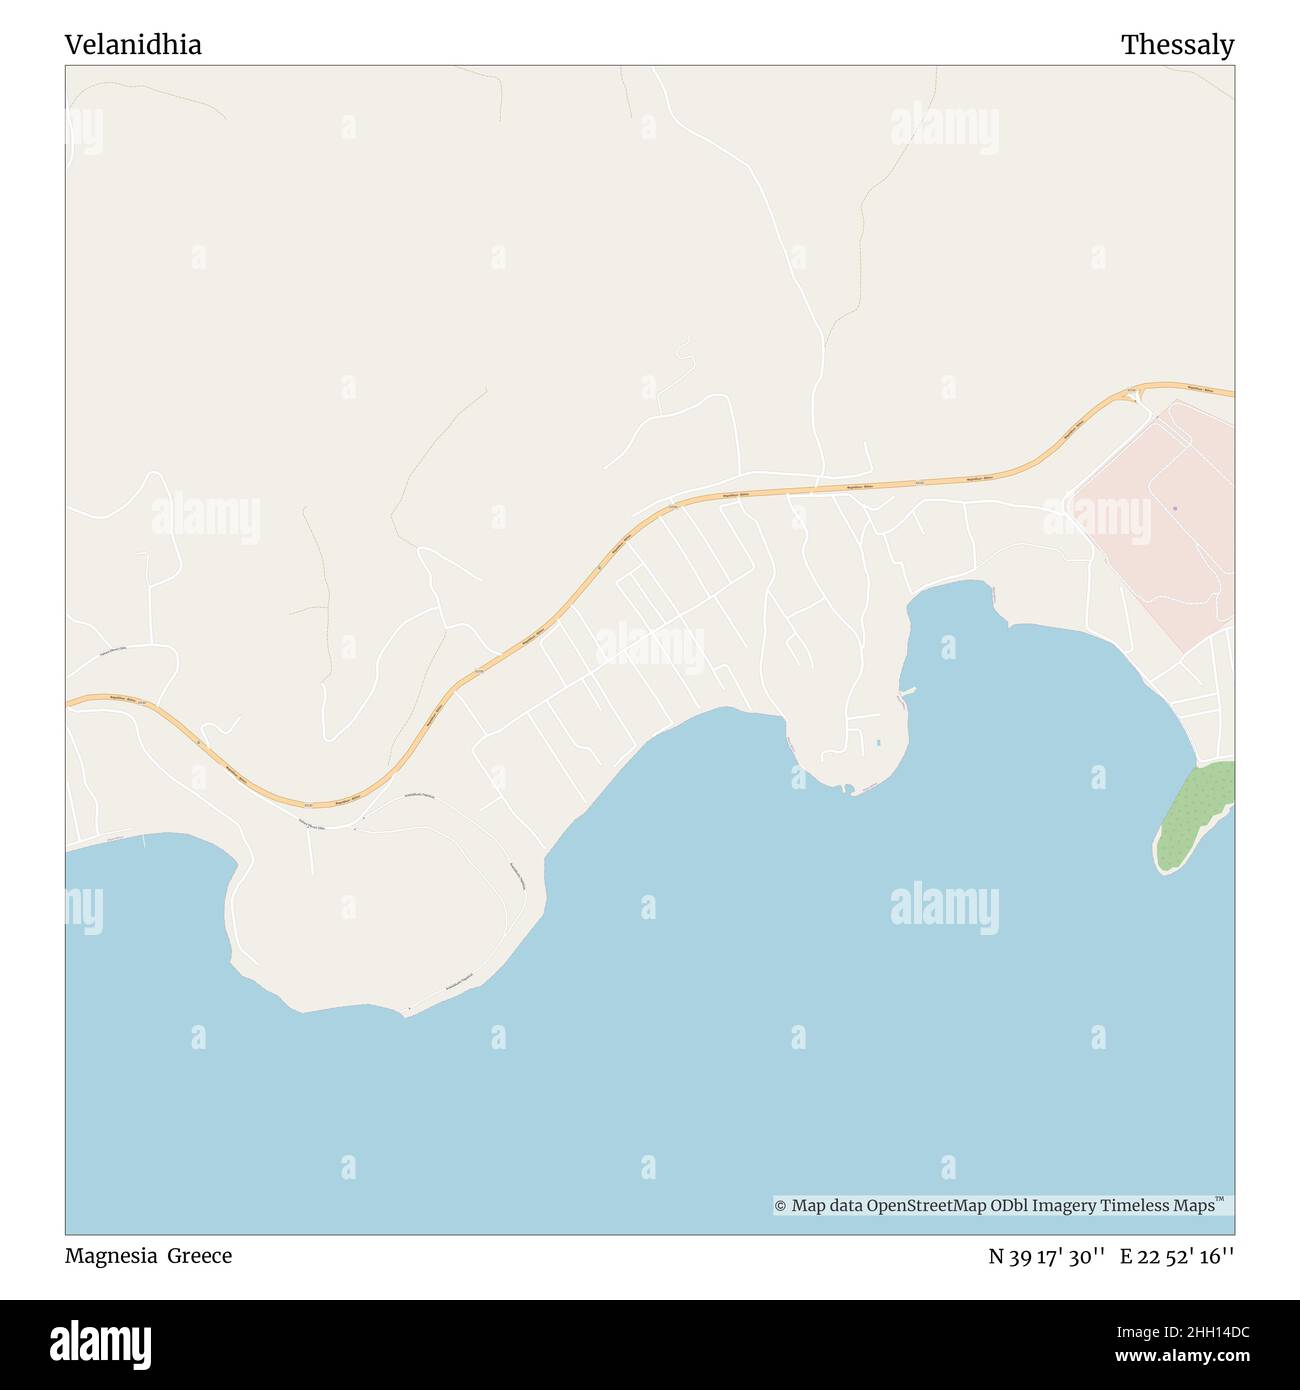 Velanidhia, Magnesia, Greece, Thessaly, N 39 17' 30'', E 22 52' 16'', map, Timeless Map published in 2021. Travelers, explorers and adventurers like Florence Nightingale, David Livingstone, Ernest Shackleton, Lewis and Clark and Sherlock Holmes relied on maps to plan travels to the world's most remote corners, Timeless Maps is mapping most locations on the globe, showing the achievement of great dreams Stock Photo